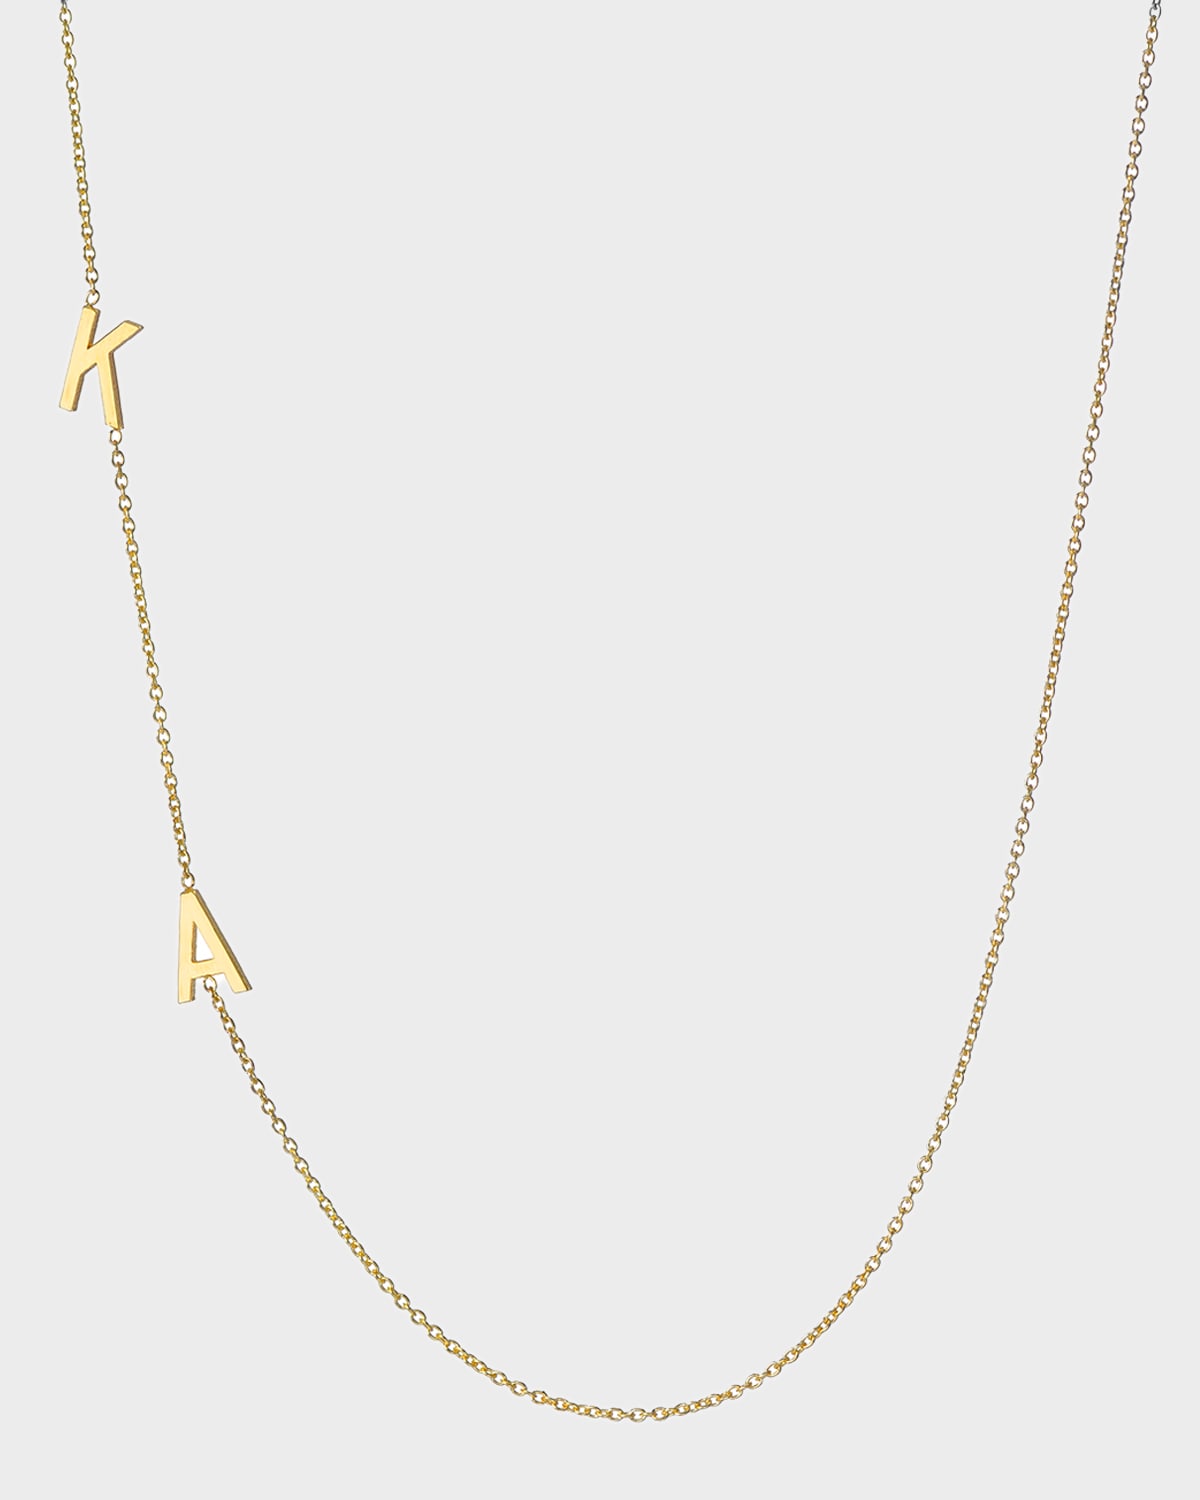 Zoe Lev Jewelry 14k Personalized 2-initial Asymmetric Necklace In Gold